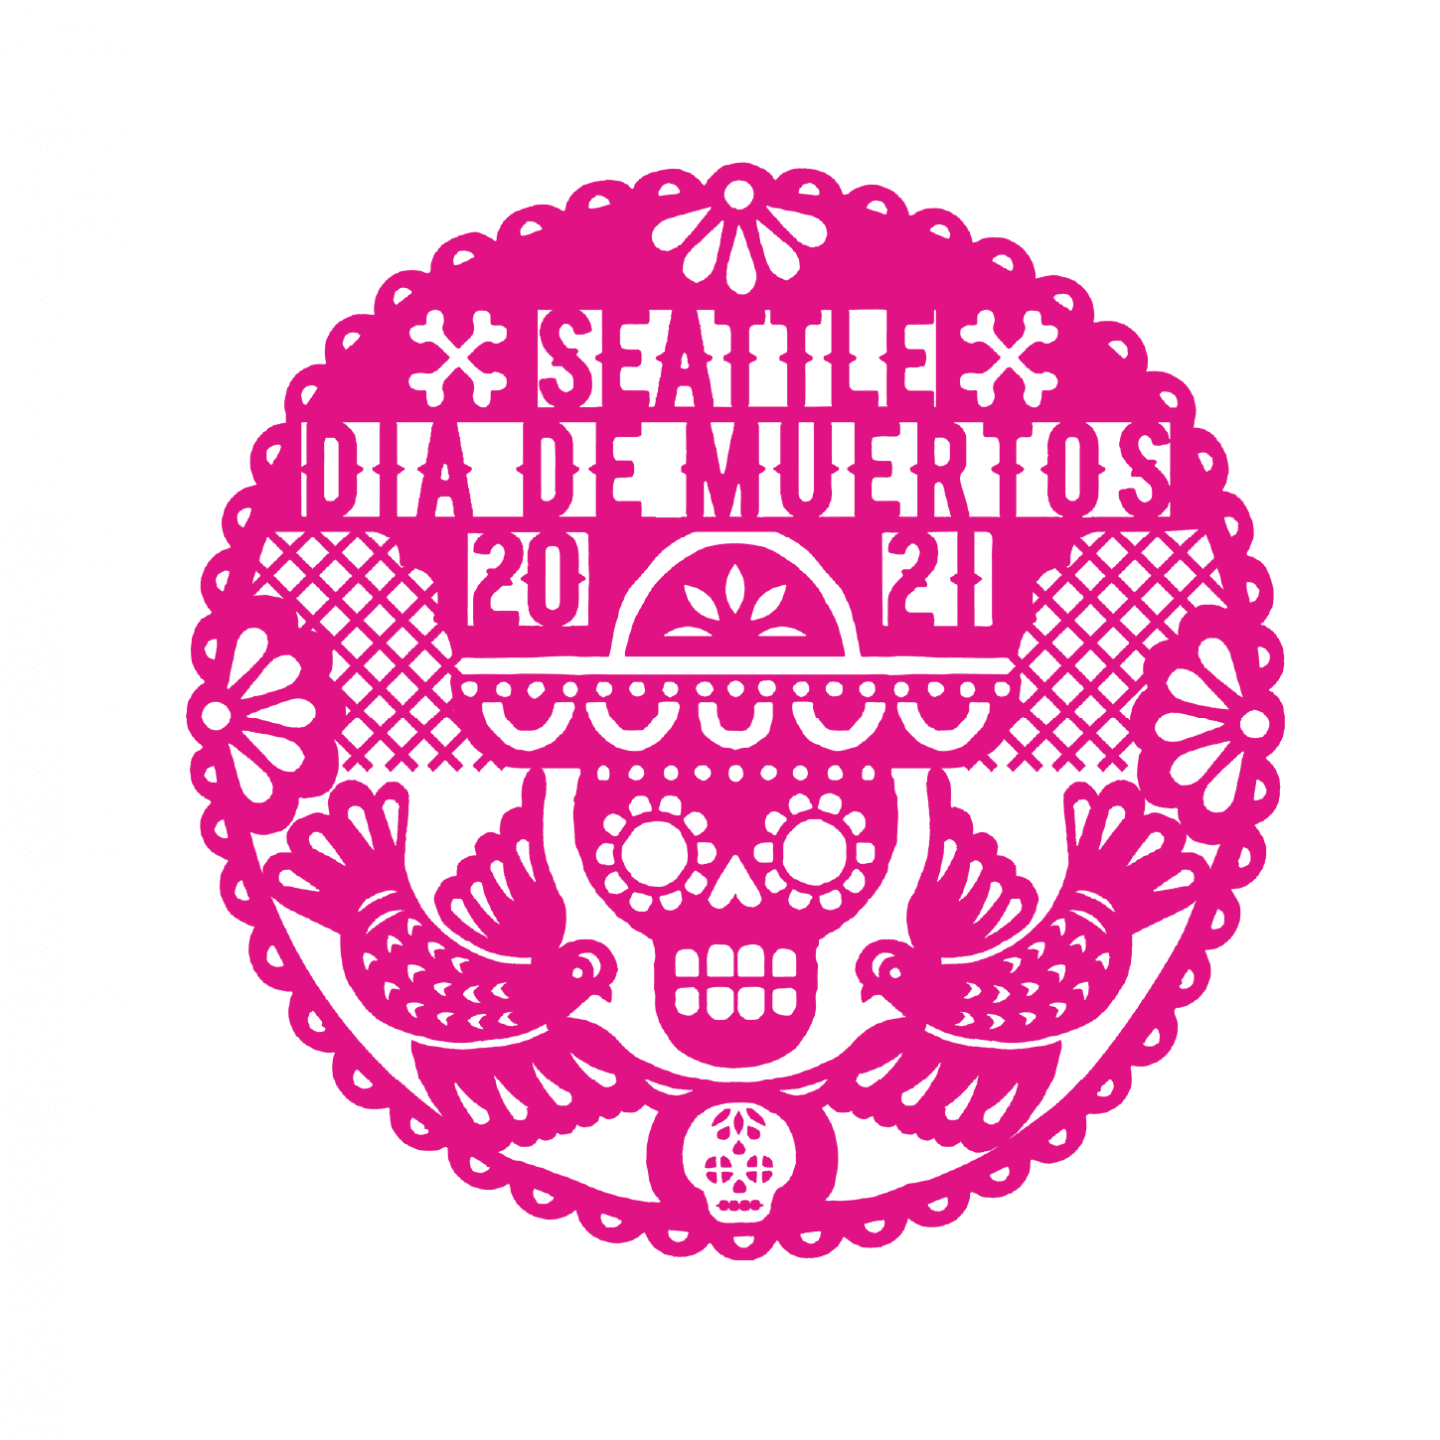 Dia de muertos 2021 - this logo is circular and pink, mimicing a papercut decoration, two skulls and two birds are also visible in the pattern.